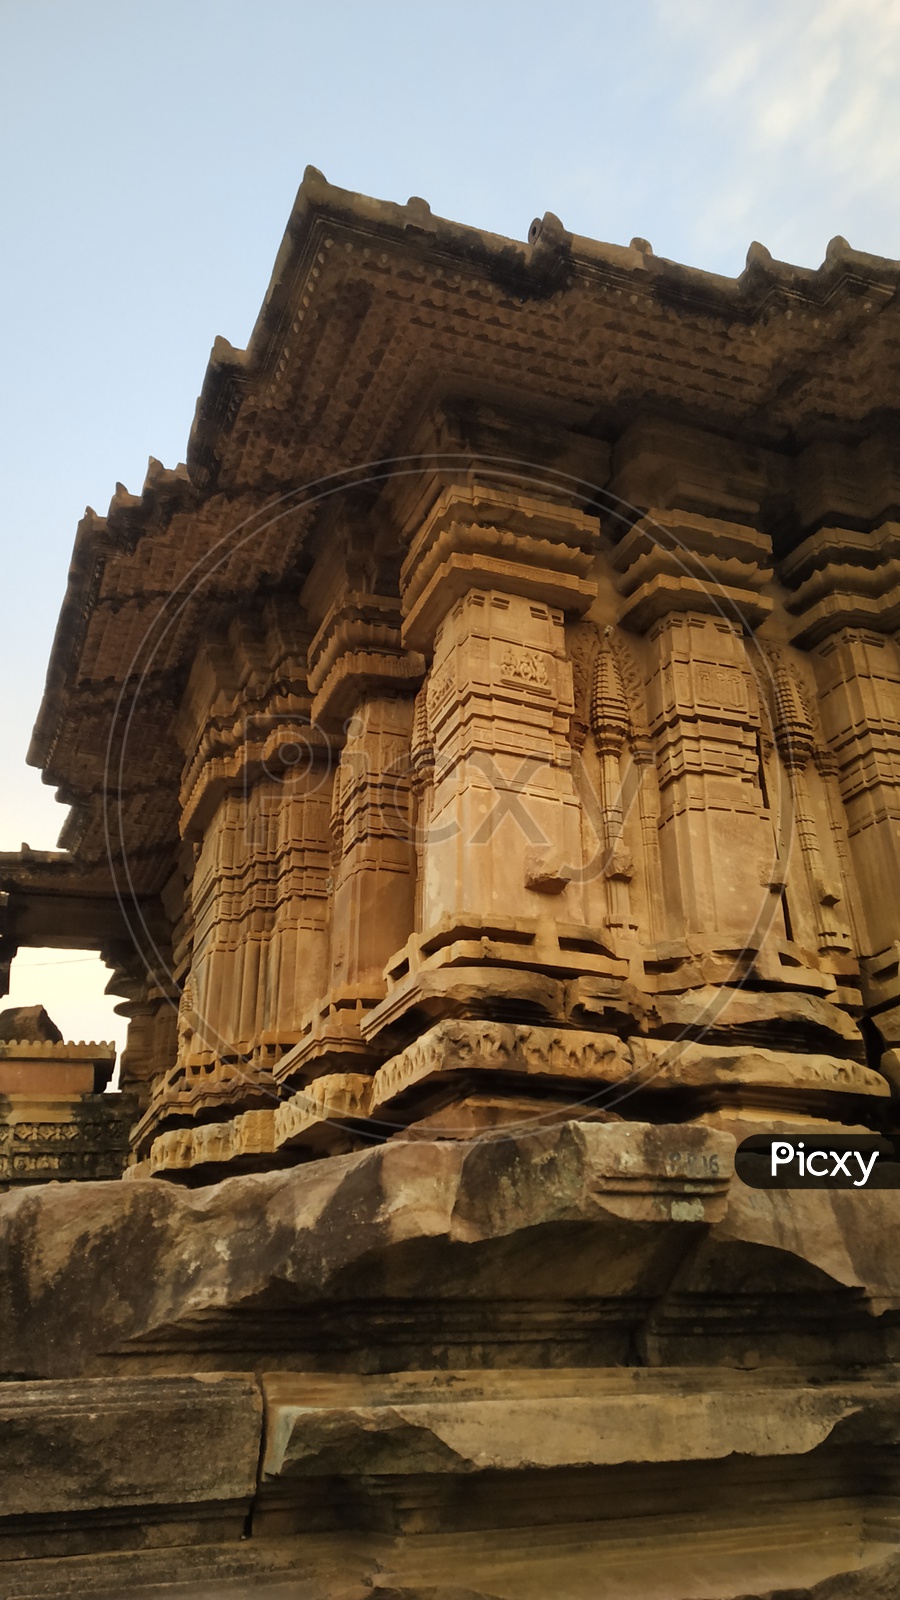 Architecture Of Ancient Temple With Stone In Warangal